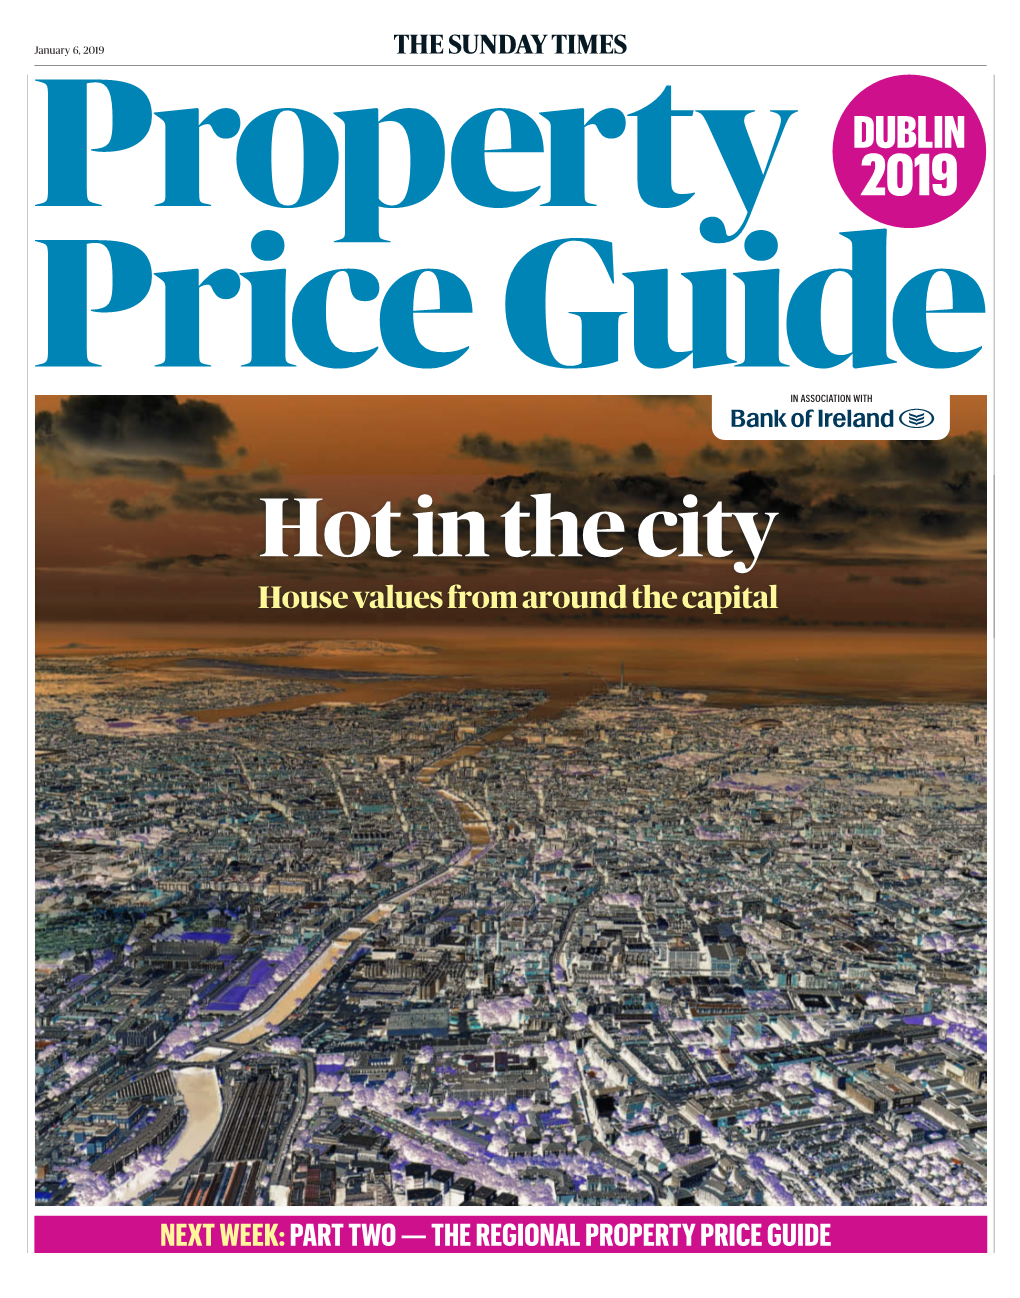 The Sunday Times 190106 Property Price Guide 2019